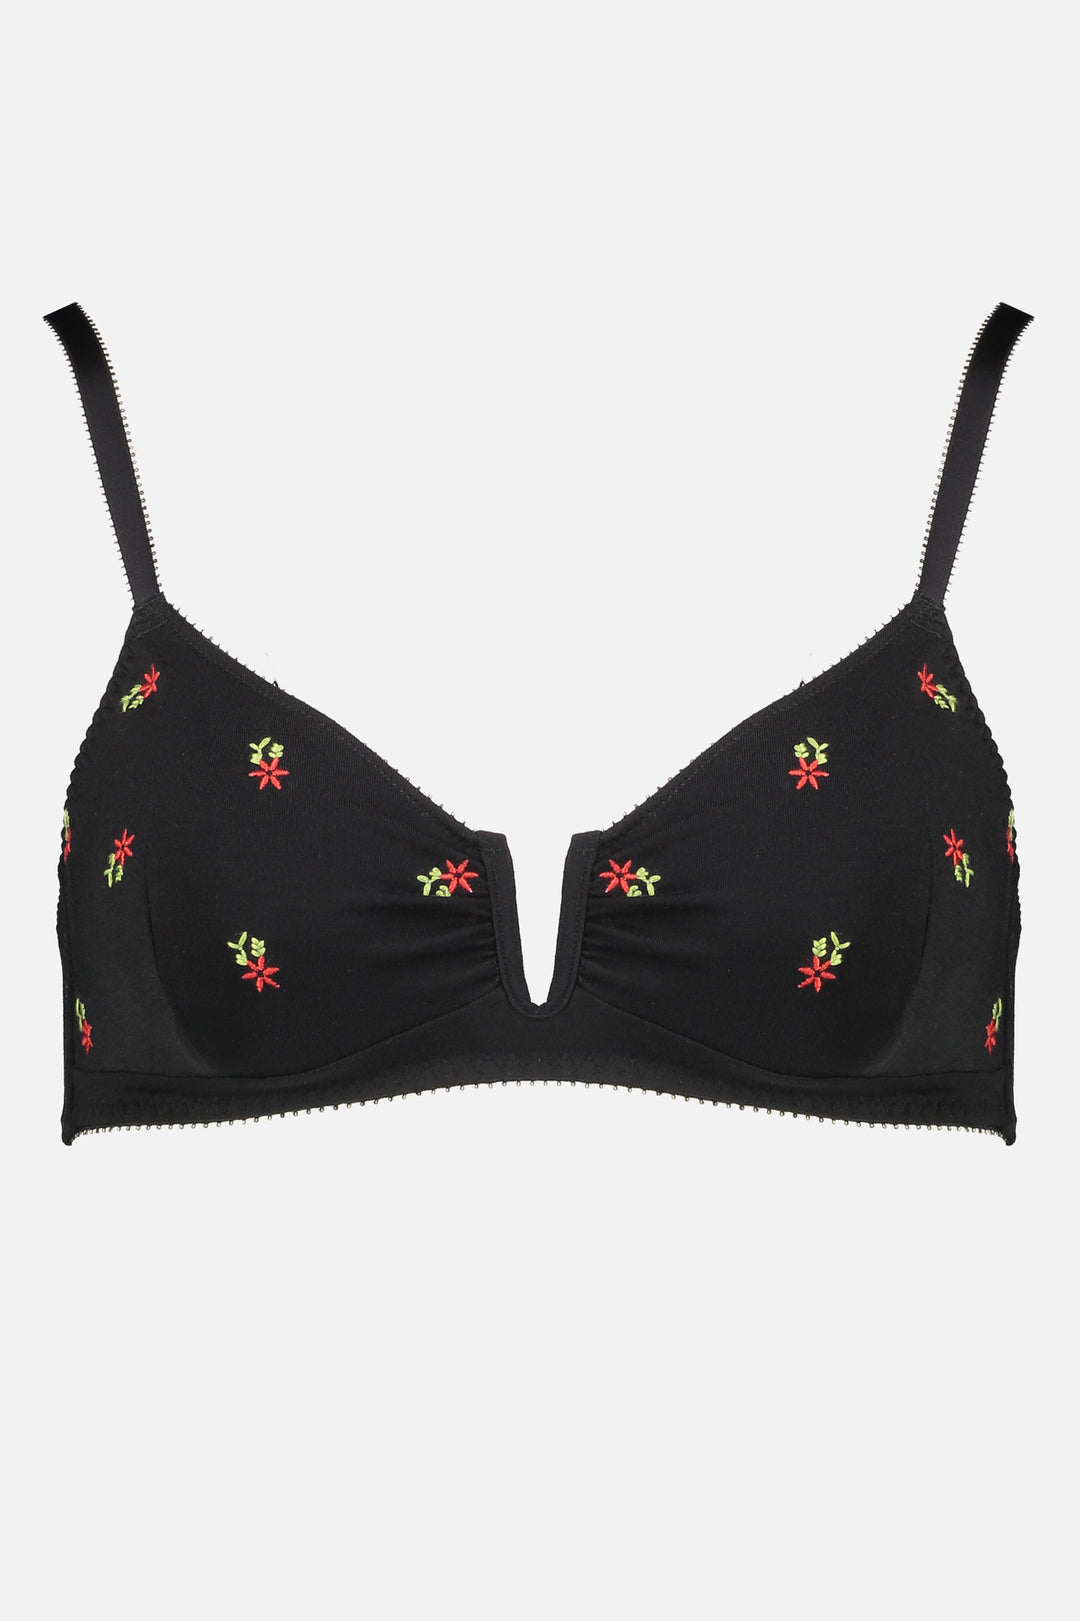 Videris Lingerie  Angela Soft Cup Bra in Black Blossom Embroidery